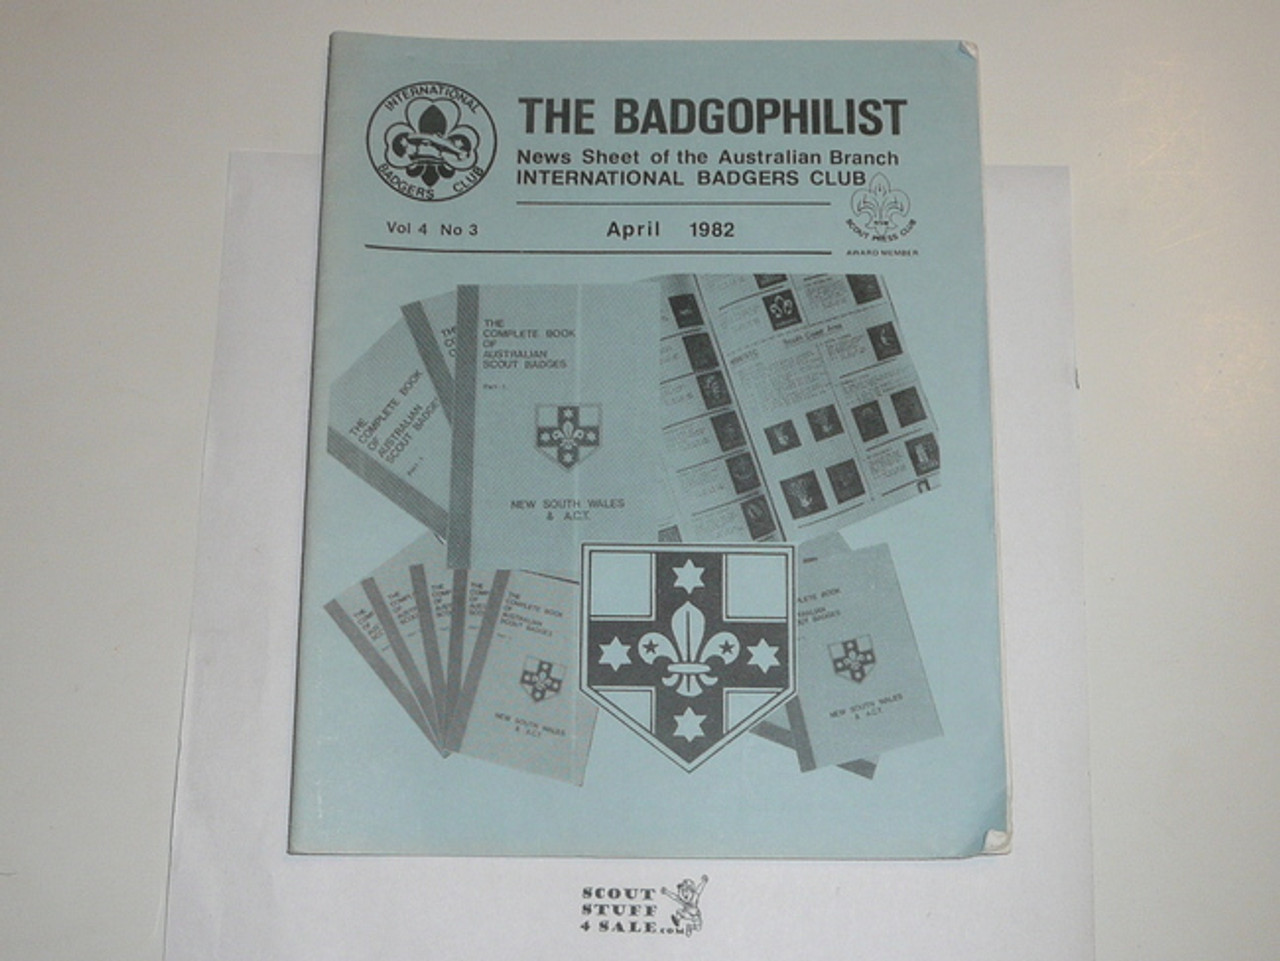 The Badgophilist, Newsletter of the Australian Branch of the International Badger clubb, 1982 April, Vol 4 #3